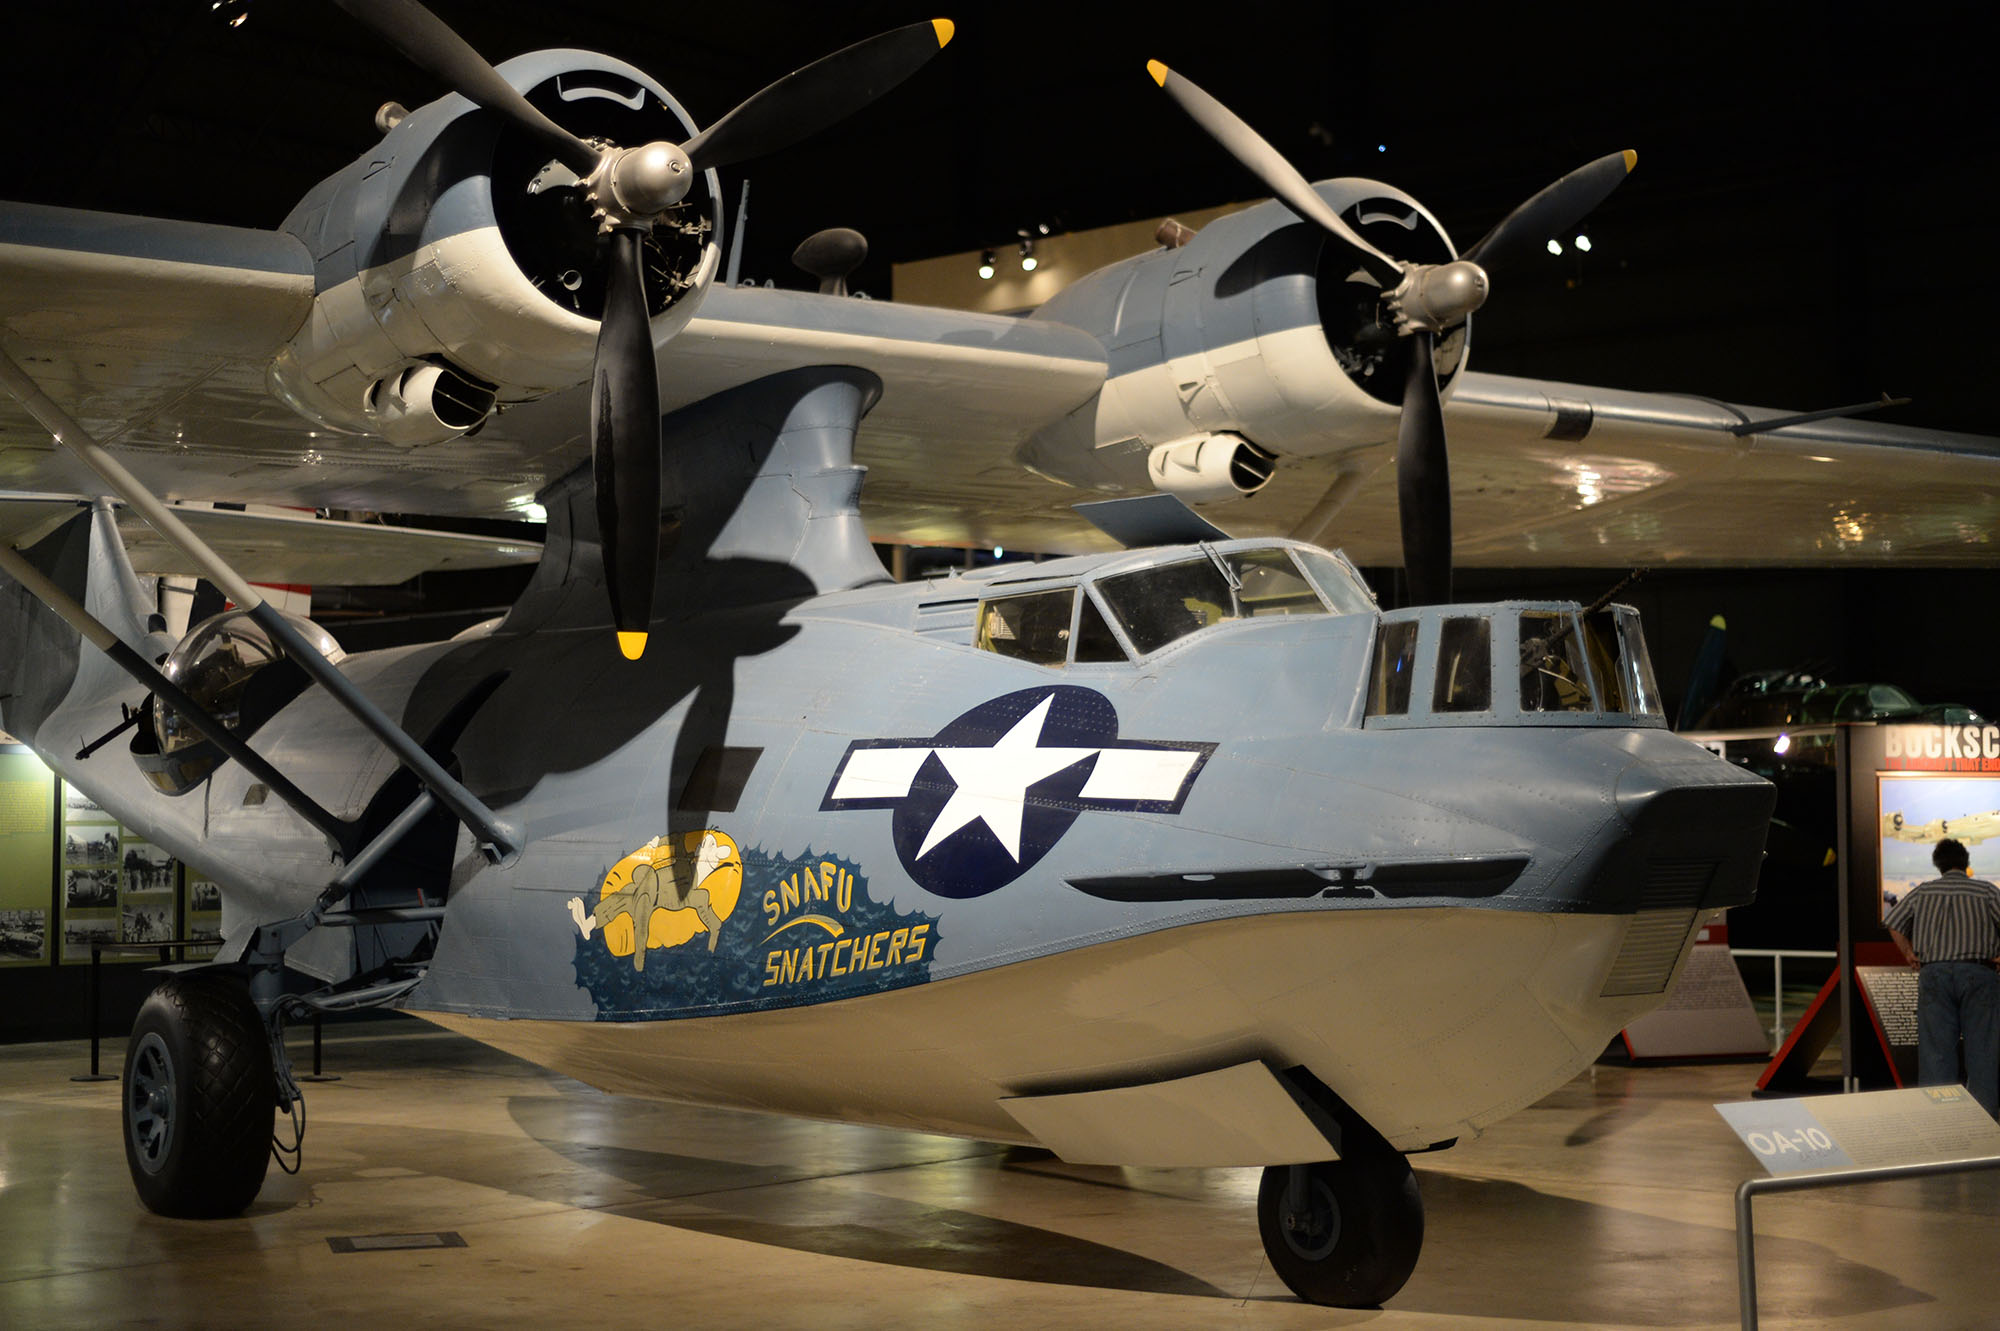 PBY-5A Catalina 'Snafu Snatchers' on display at the National Museum of the United States Air Force as an OA-10A Catalina, Dayton, Ohio, United States, 27 Jun 2014